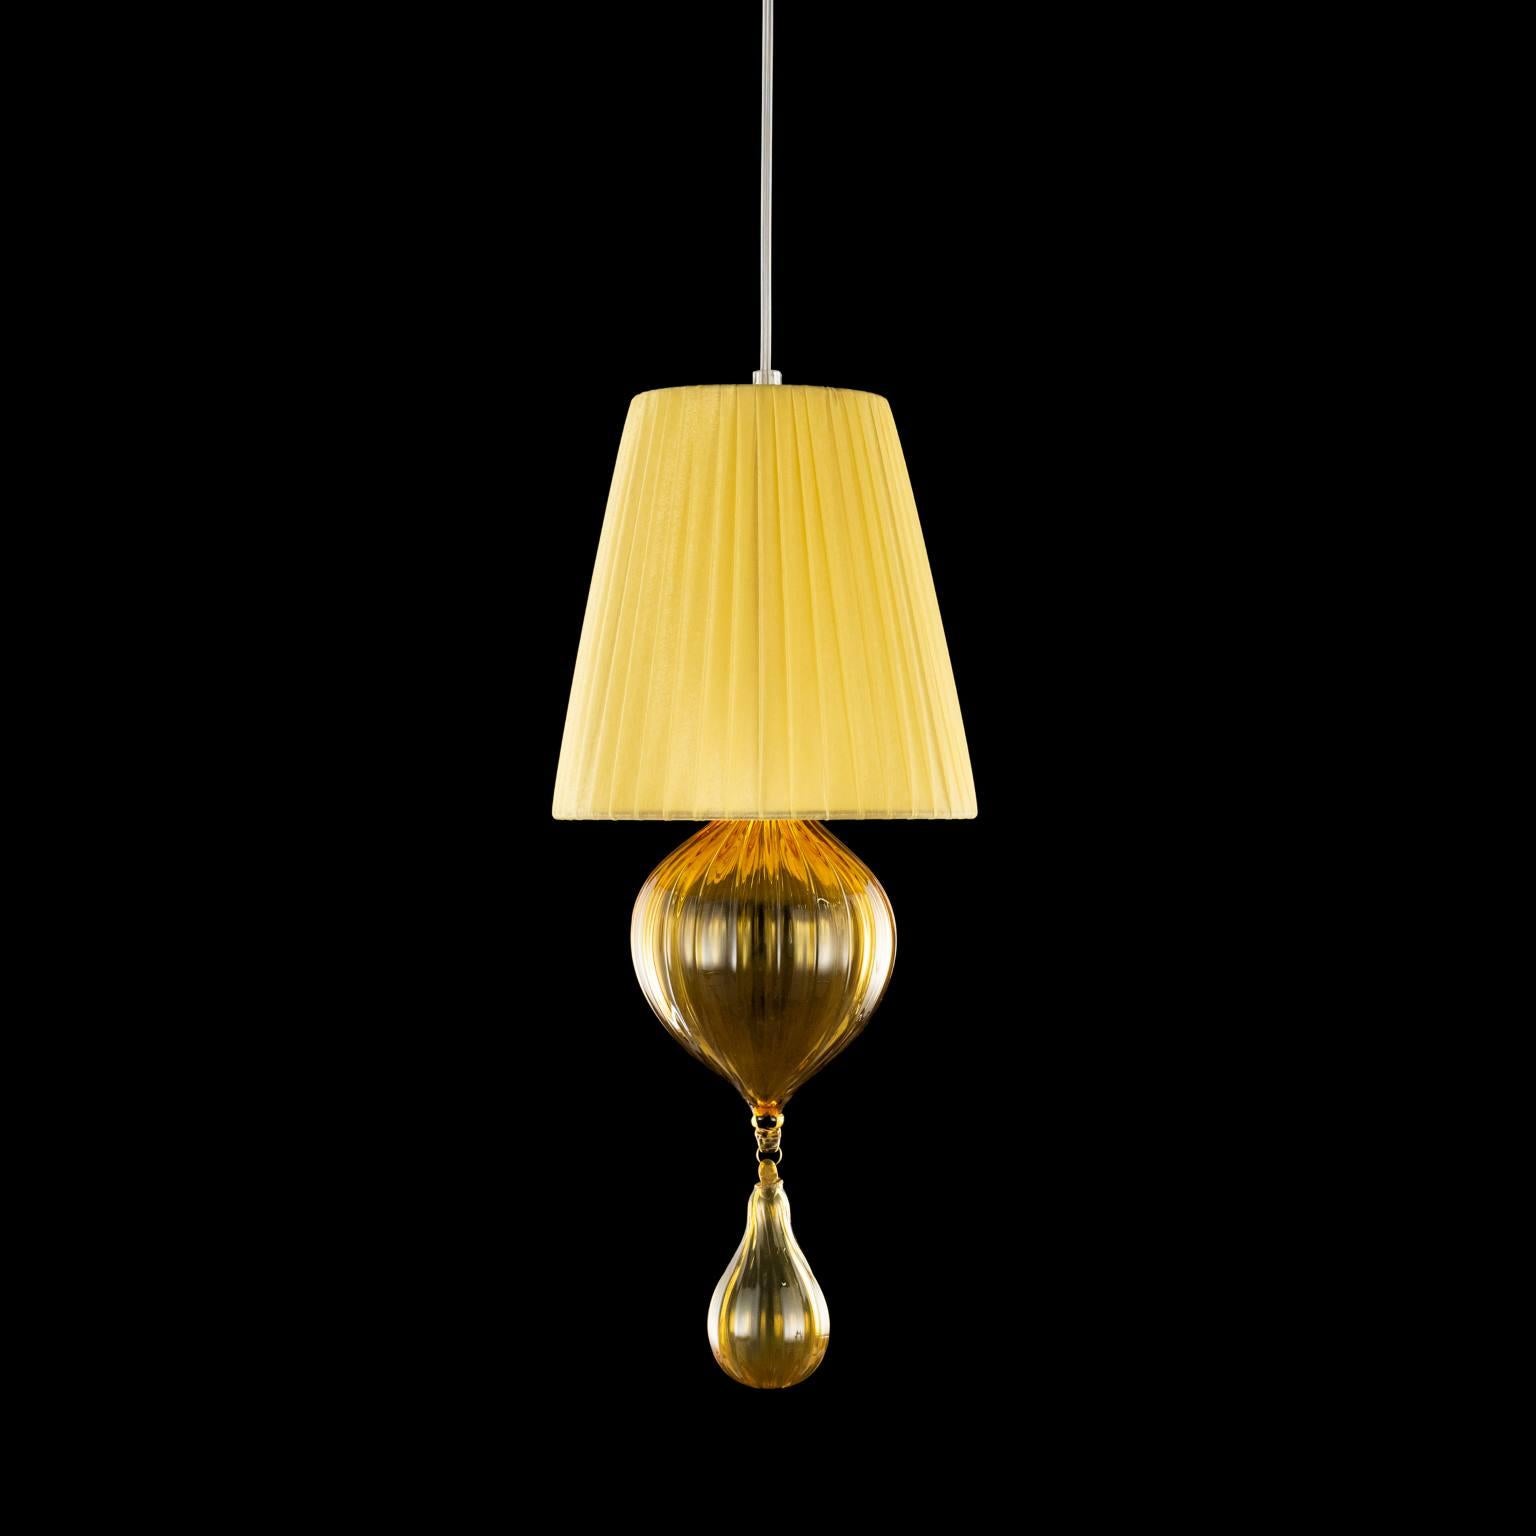 Suspension 1 light amber Murano glass, organza amber lampshade by Multiforme
 
Chapeau is a Classic and essential chandelier, it is handcrafted using high quality materials in murano glass and handmade cotton lampshades. This murano glass